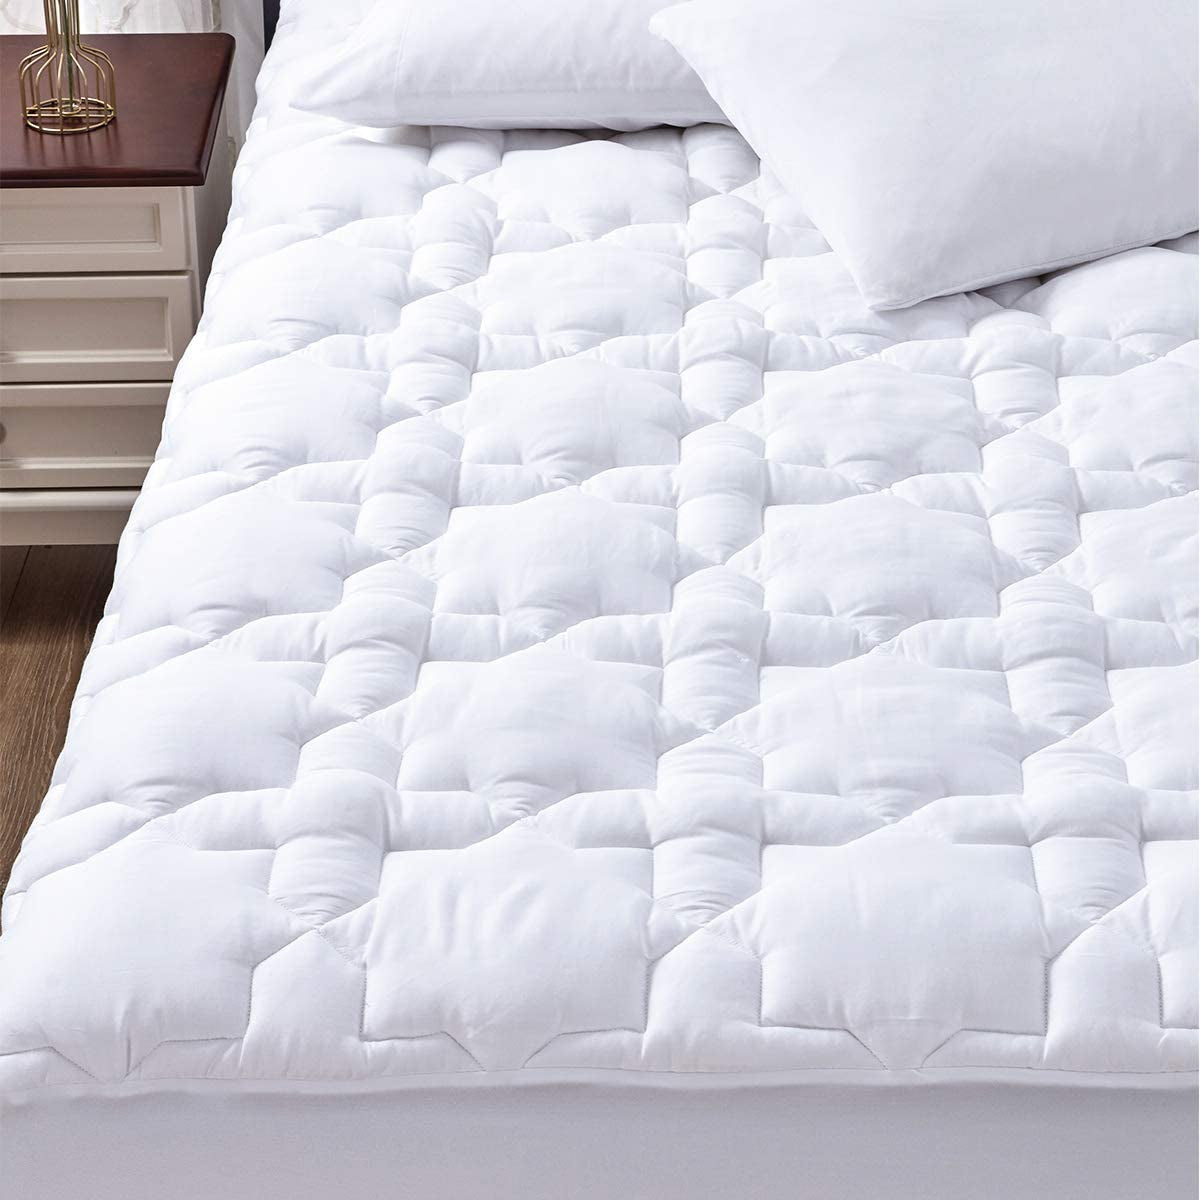 Cozylux Twin XL Cotton Mattress Pad Deep Pocket Quilted Mattress Cover Extra Long for College Dorm Pillowtop Mattress Protector up to 20", Fitted Sheet Mattress Cover, 39X80 Inches, White